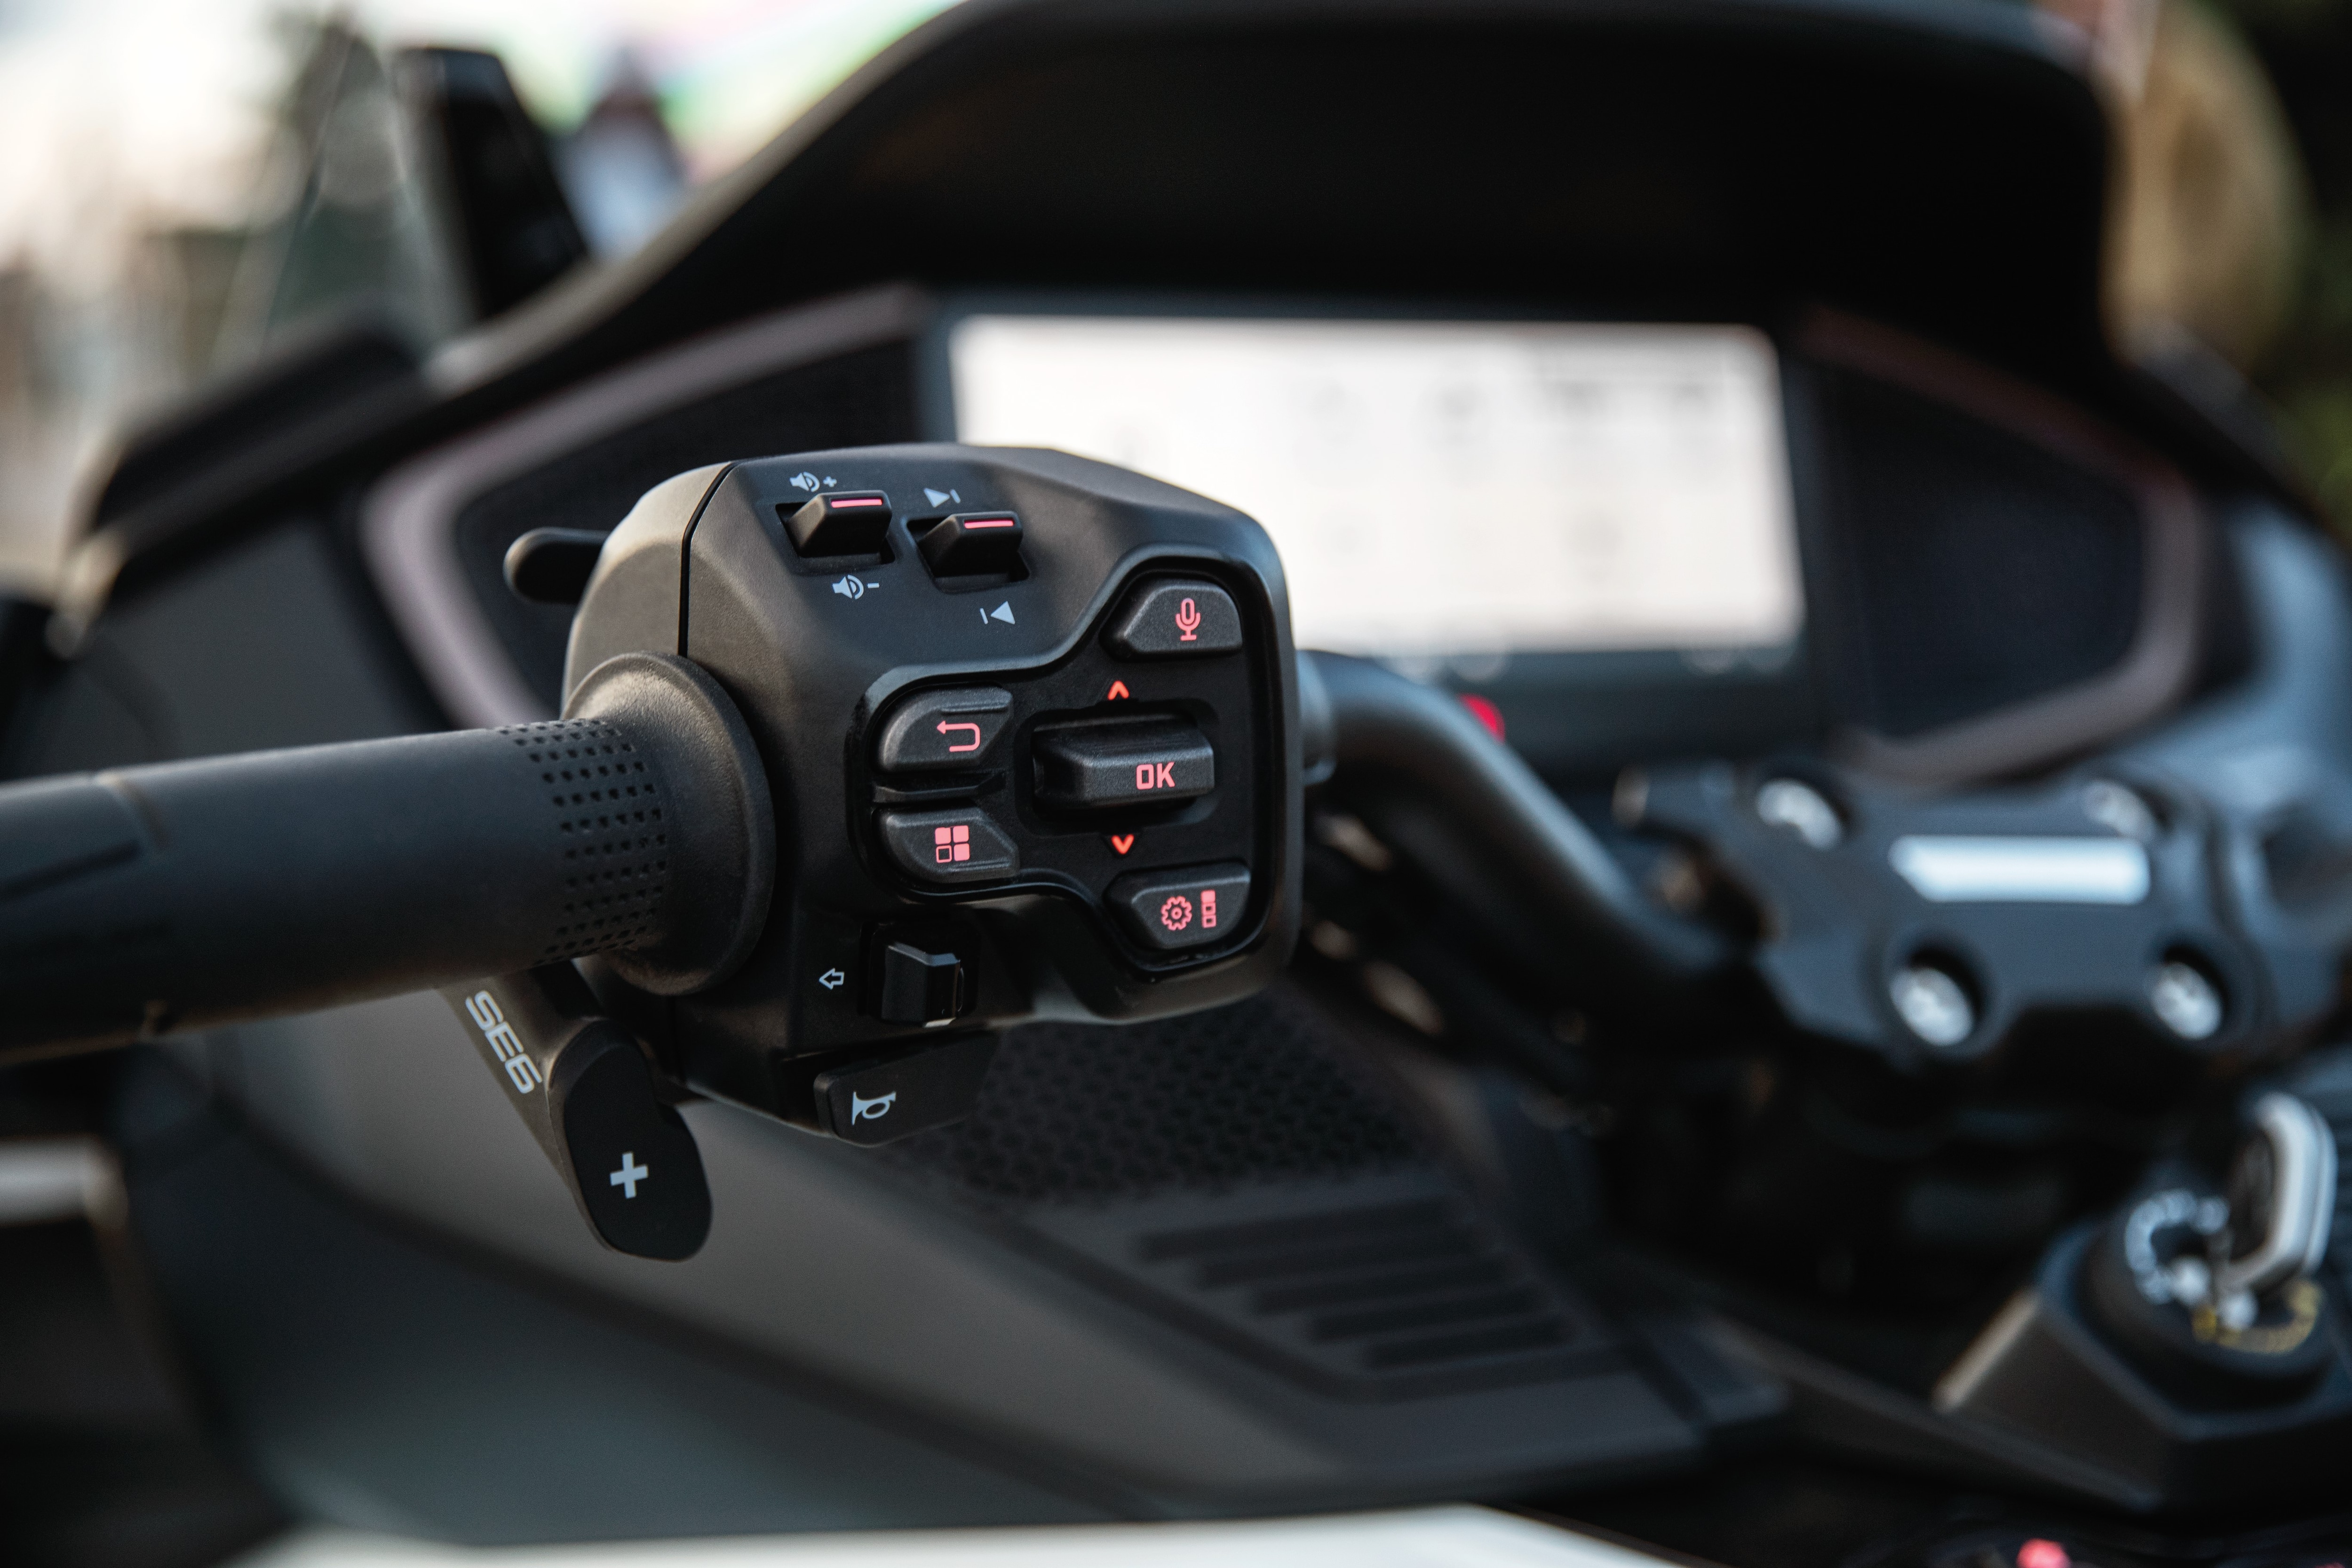 The driver’s seat view of a Can-Am Spyder vehicle’s console with Eco Mode Smart Assist activated.